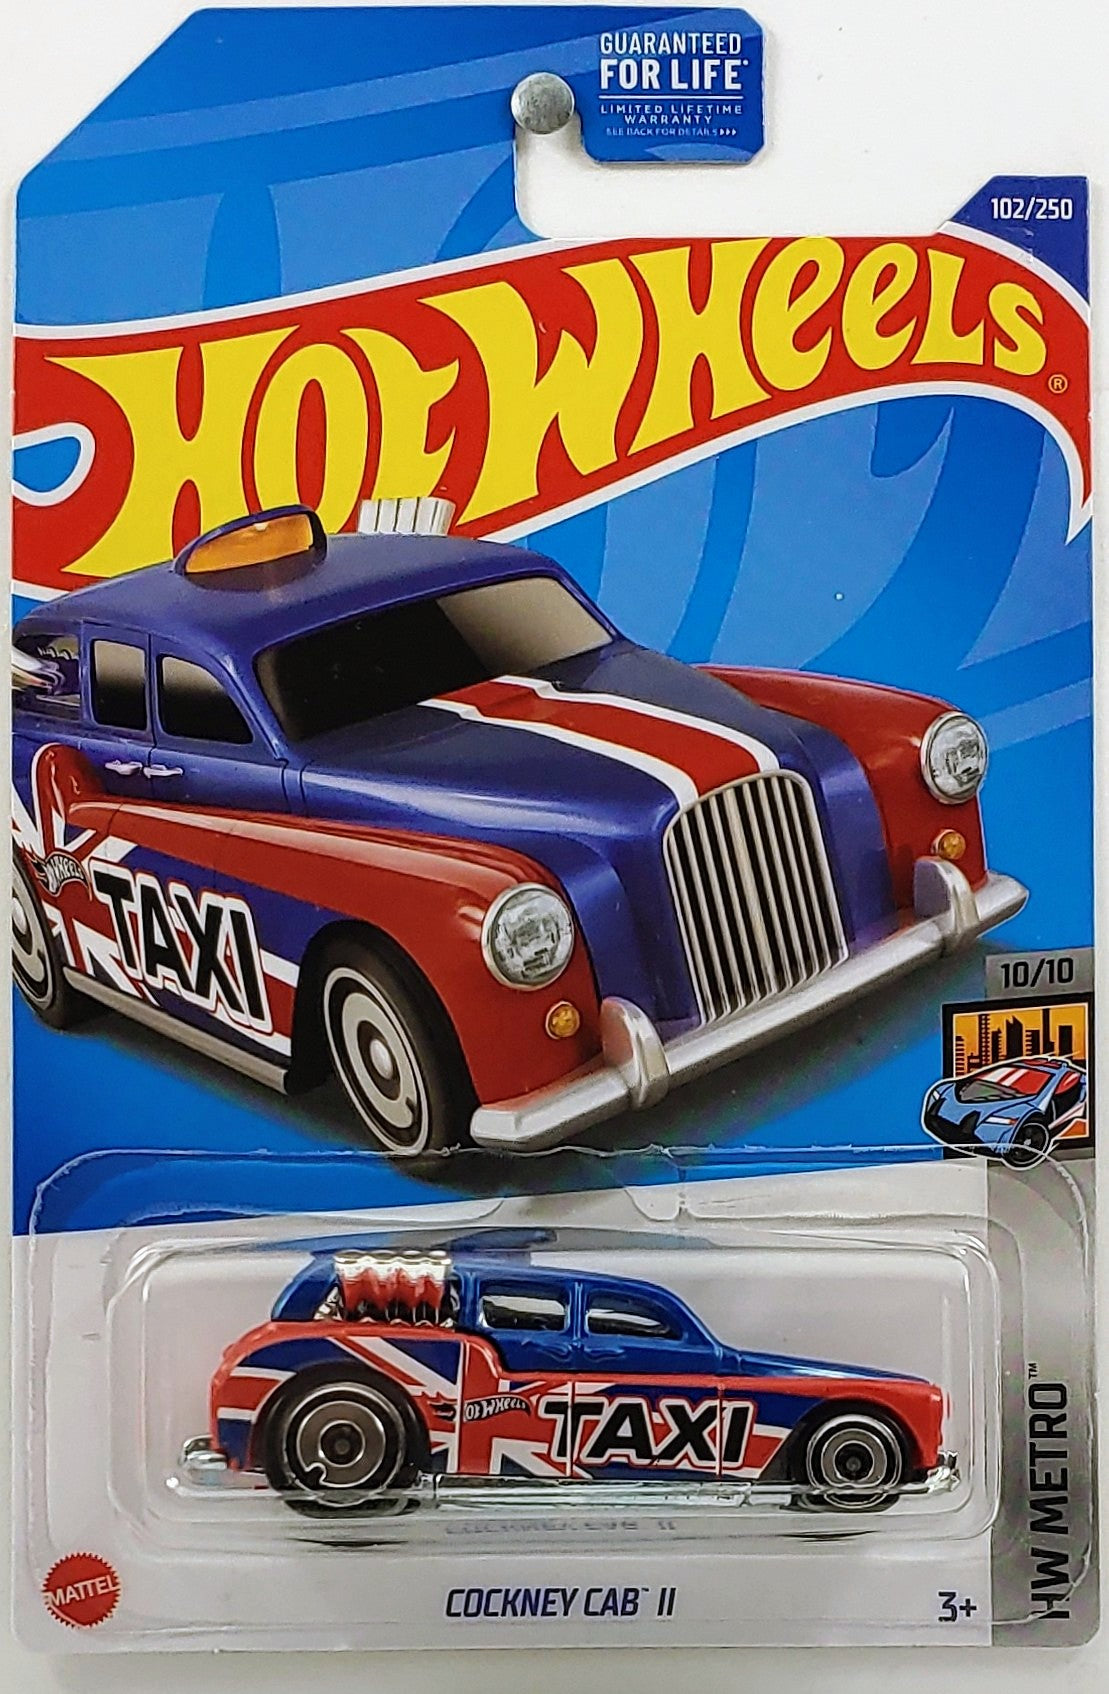 Hot Wheels 2022 - Collector # 102/250 - HW Metro 10/10 - Cockney Cab II - Blue & Red / Union Jack Taxi - USA